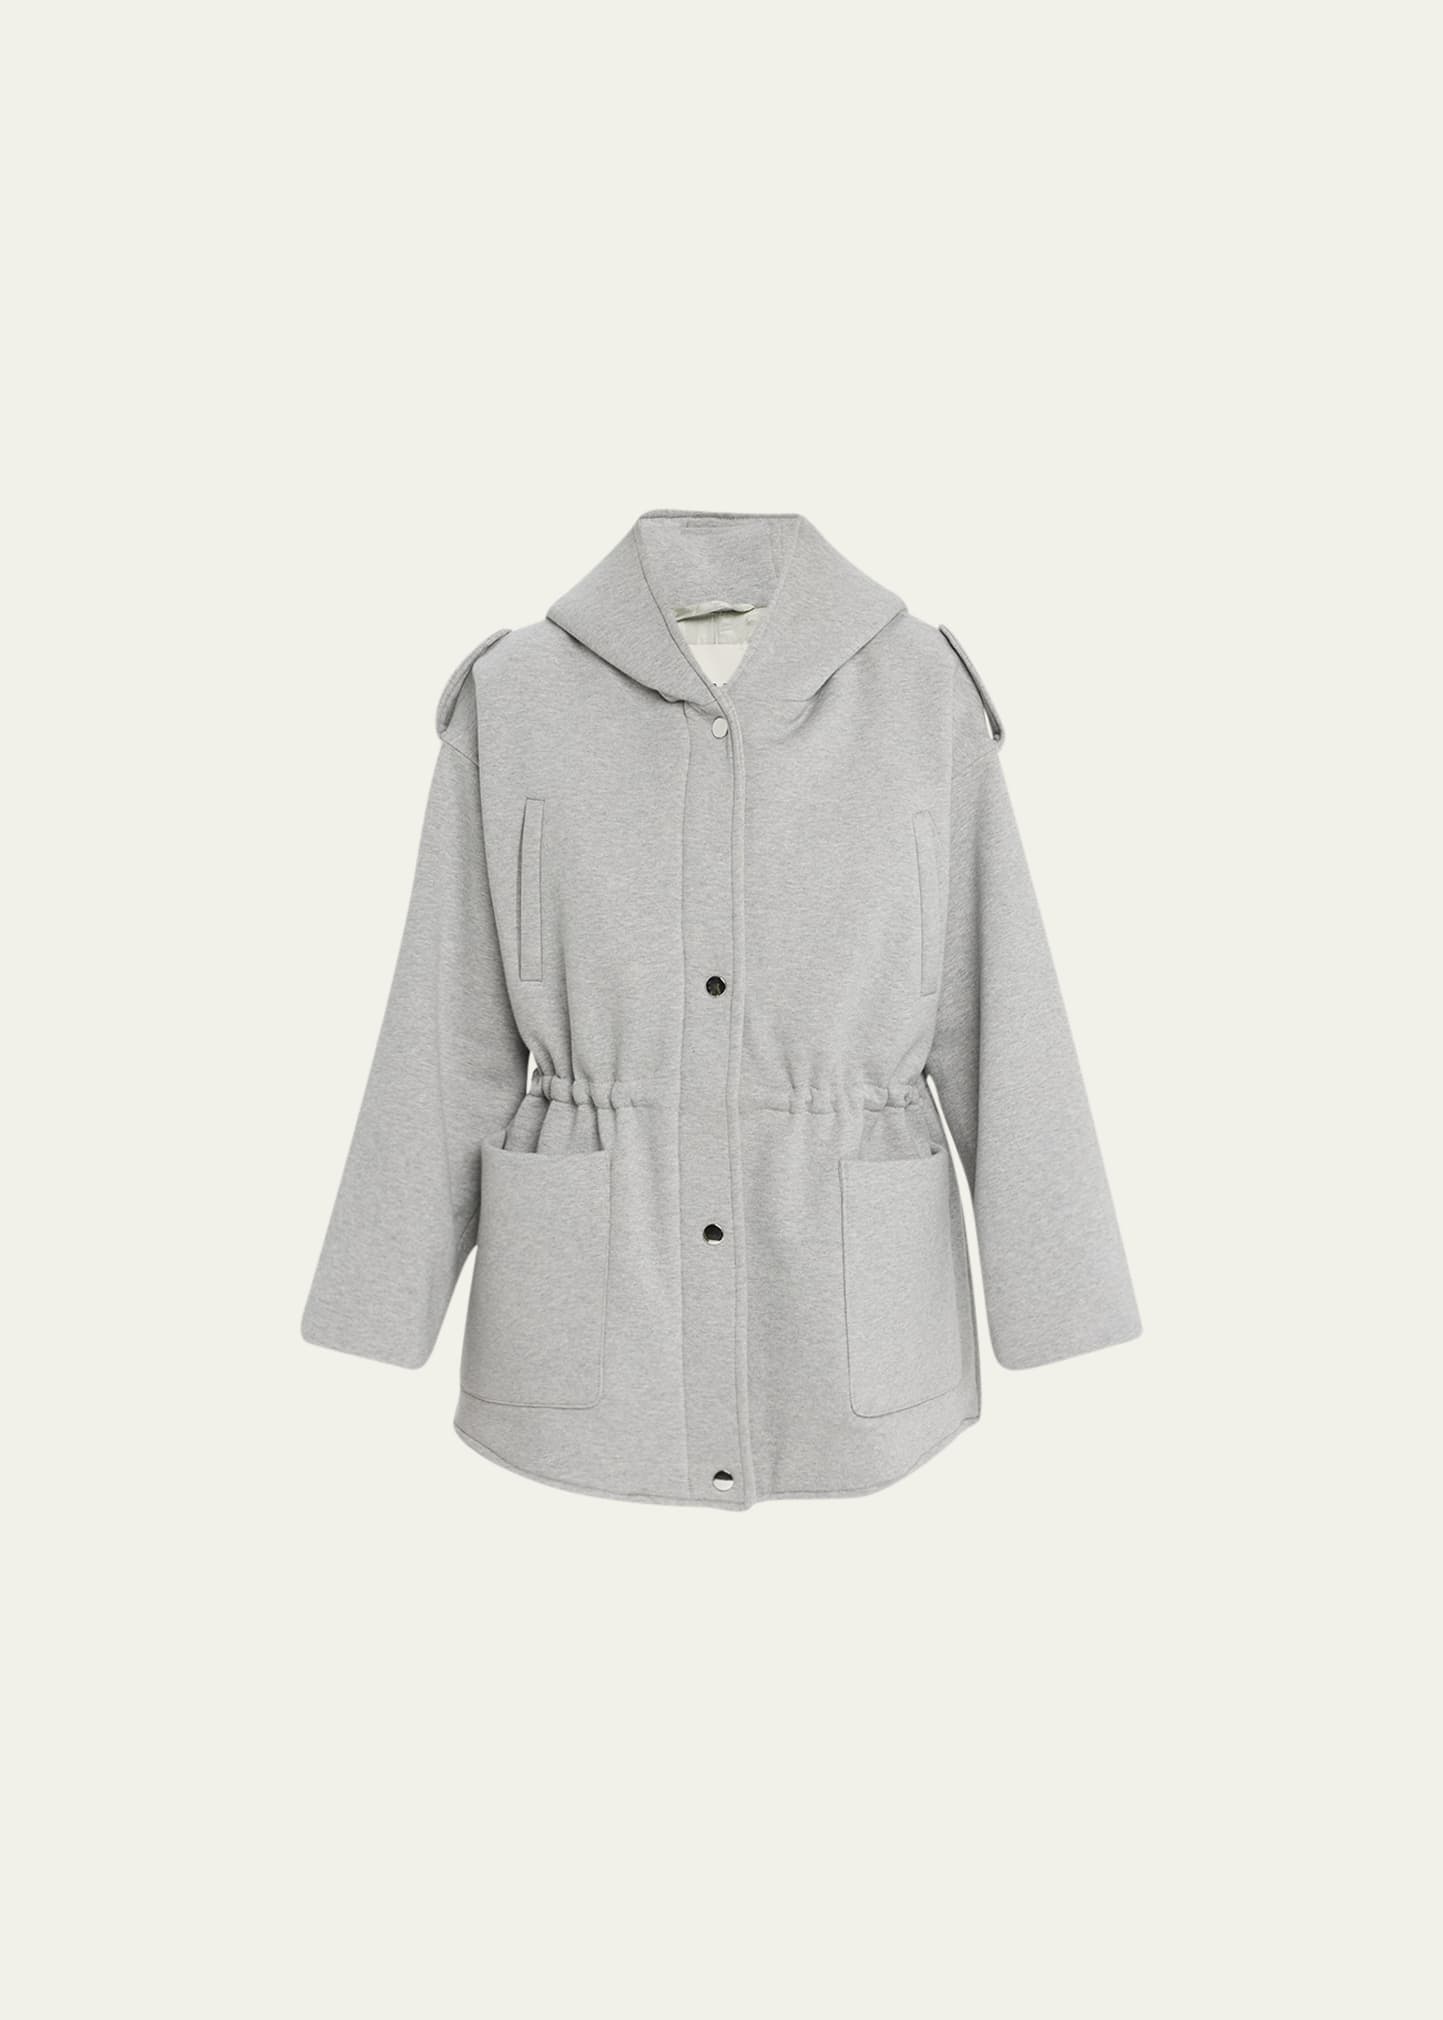 Faz Ruby Hooded Top Coat With Drawcord Waist In Grey